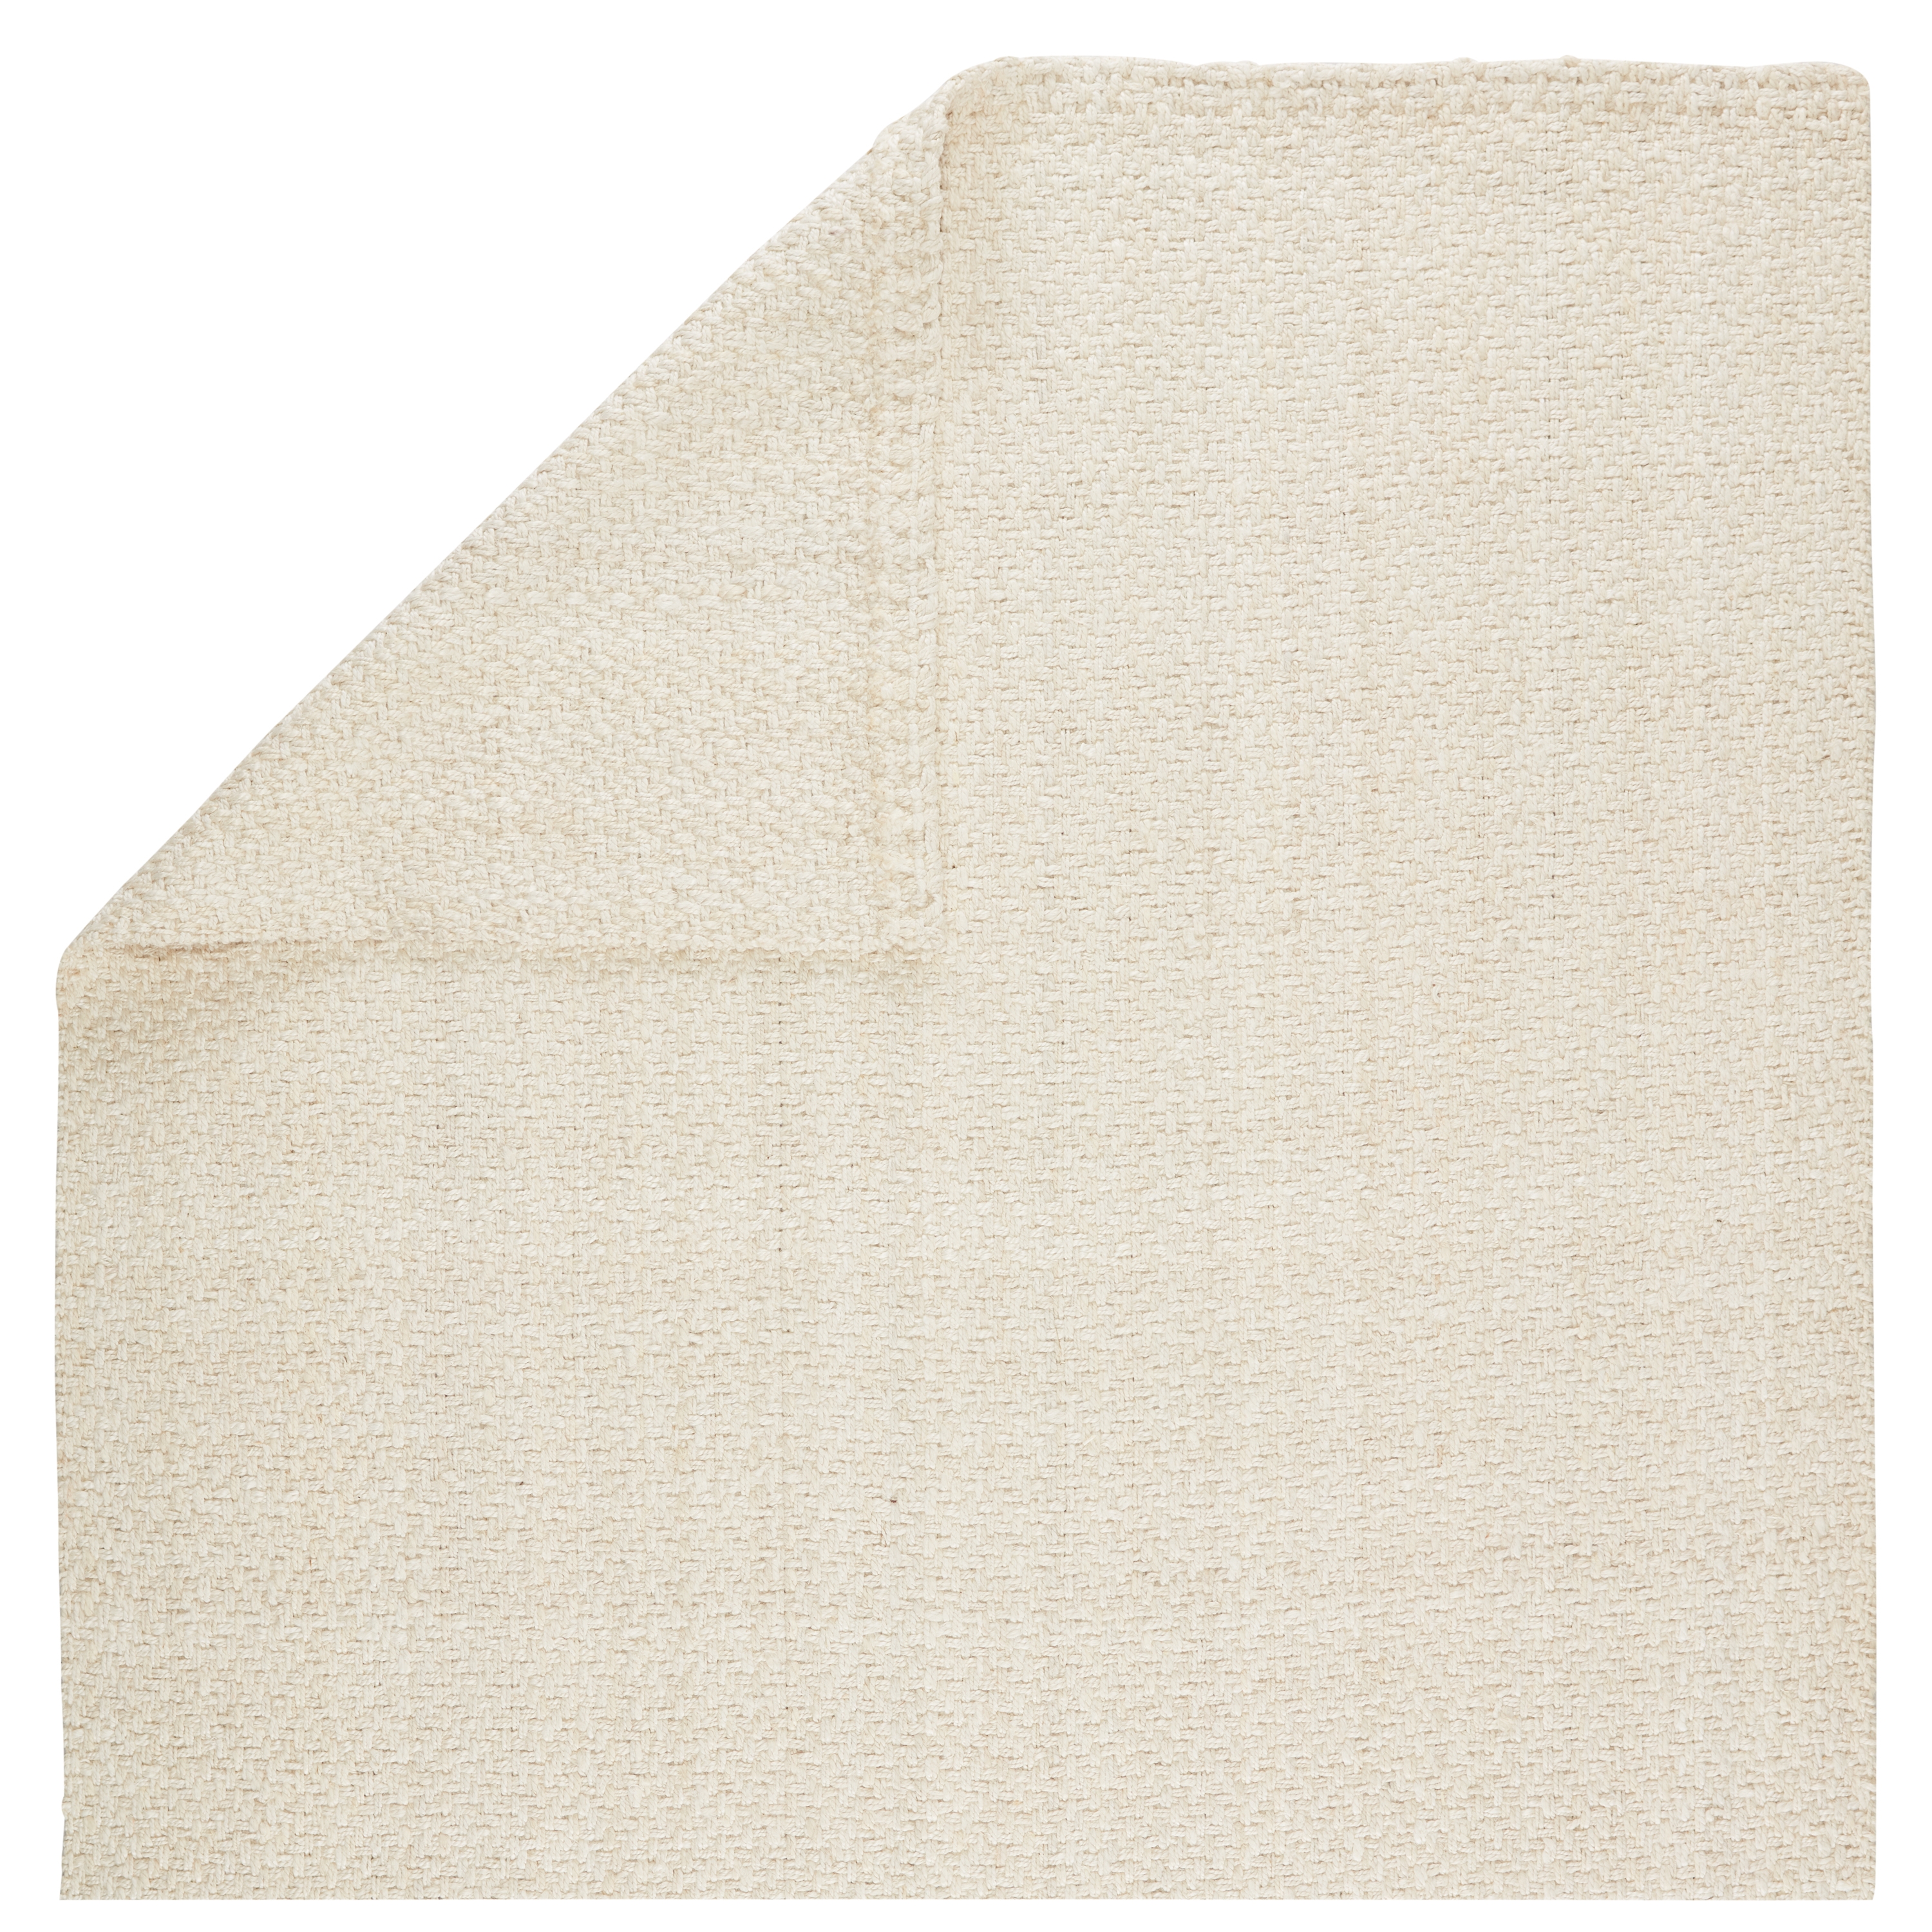 Tracie Natural Solid White Area Rug (8' X 10') - Image 2